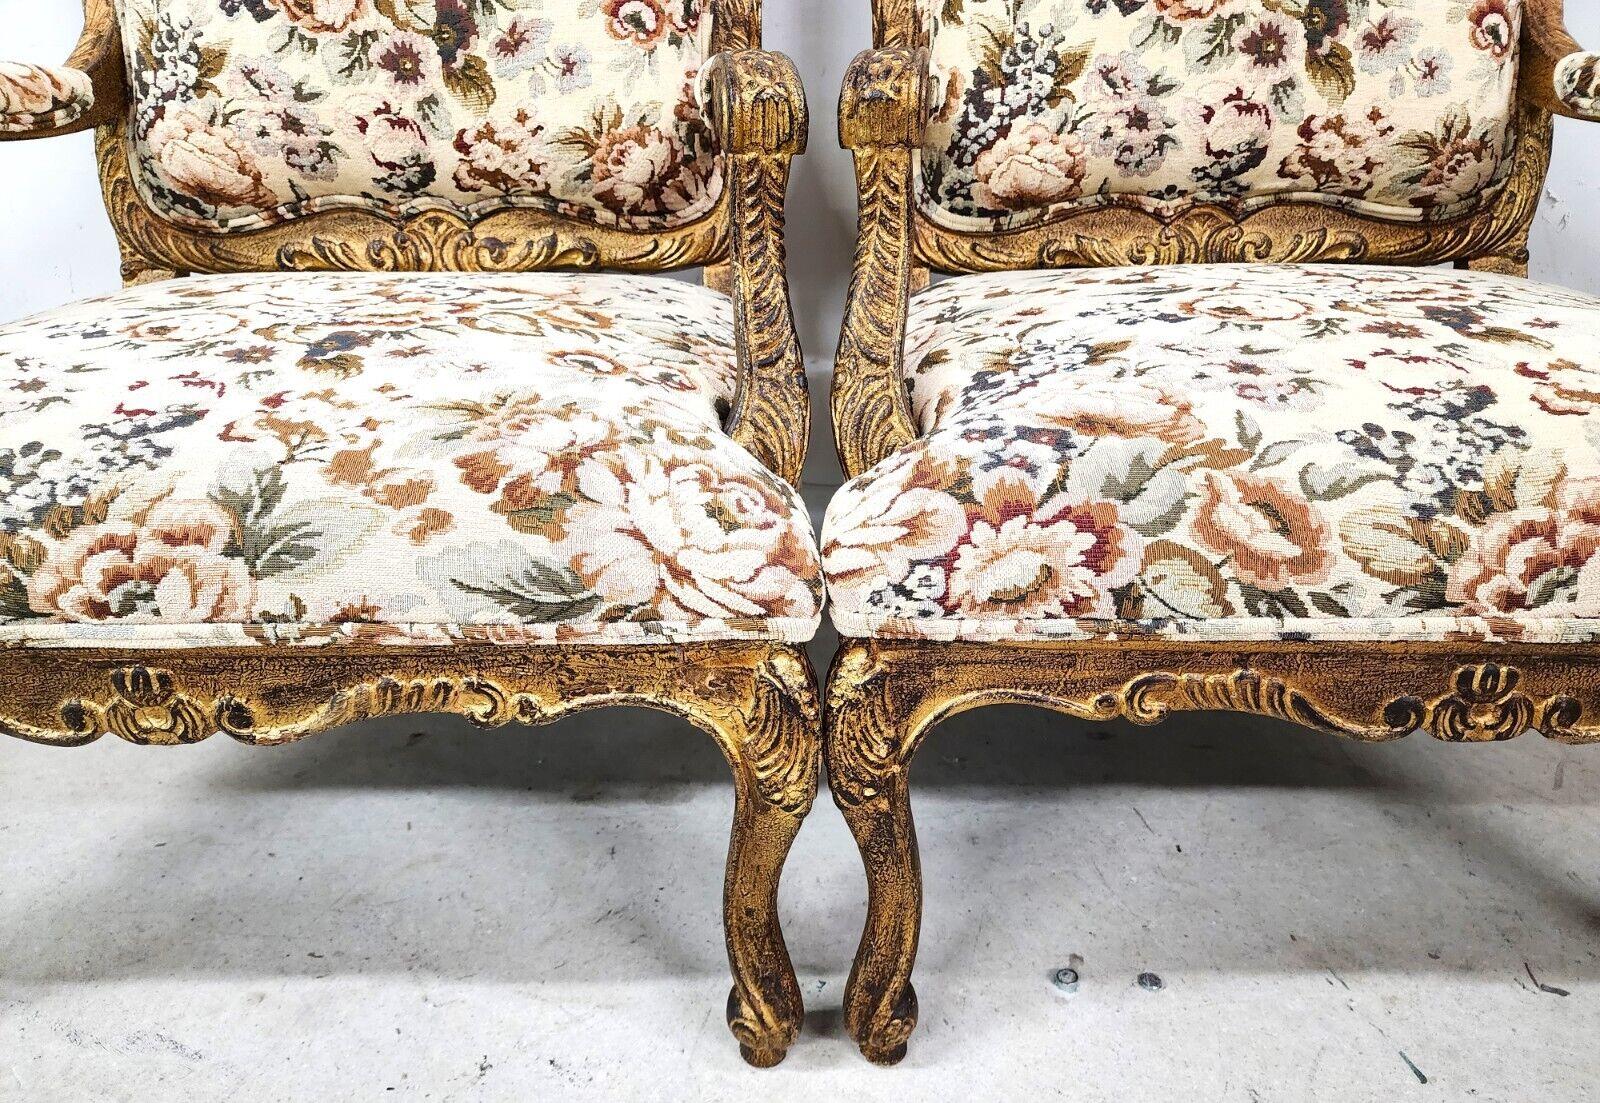 French Louis XV Rococo Giltwood Fauteuil Oversized Armchairs - a Pair For Sale 3